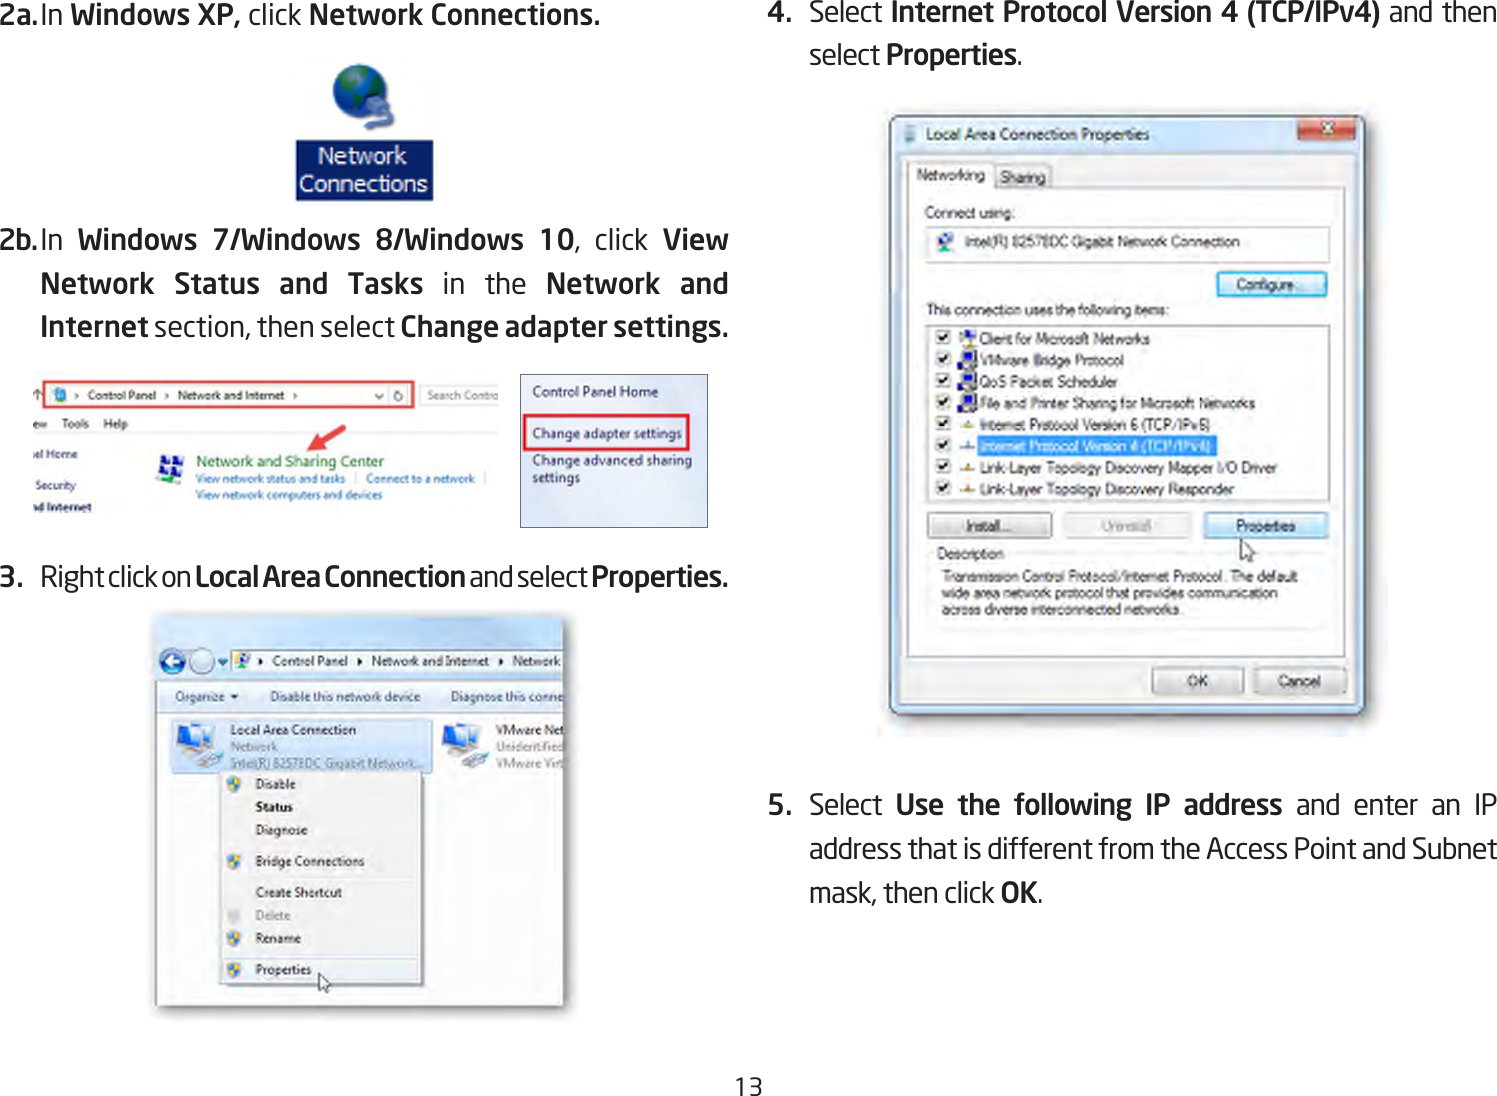 132a. In Windows XP, click Network Connections. 2b. In  Windows  7/Windows  8/Windows  10, click View Network Status and Tasks in the Network and Internet section, then select Change adapter settings.3.  Right click on Local Area Connection and select Properties.4.  Select Internet Protocol Version 4 (TCP/IPv4) and then select Properties.5.  Select  Use the following IP address and enter an IP address that is different from the Access Point and Subnet mask, then click OK.